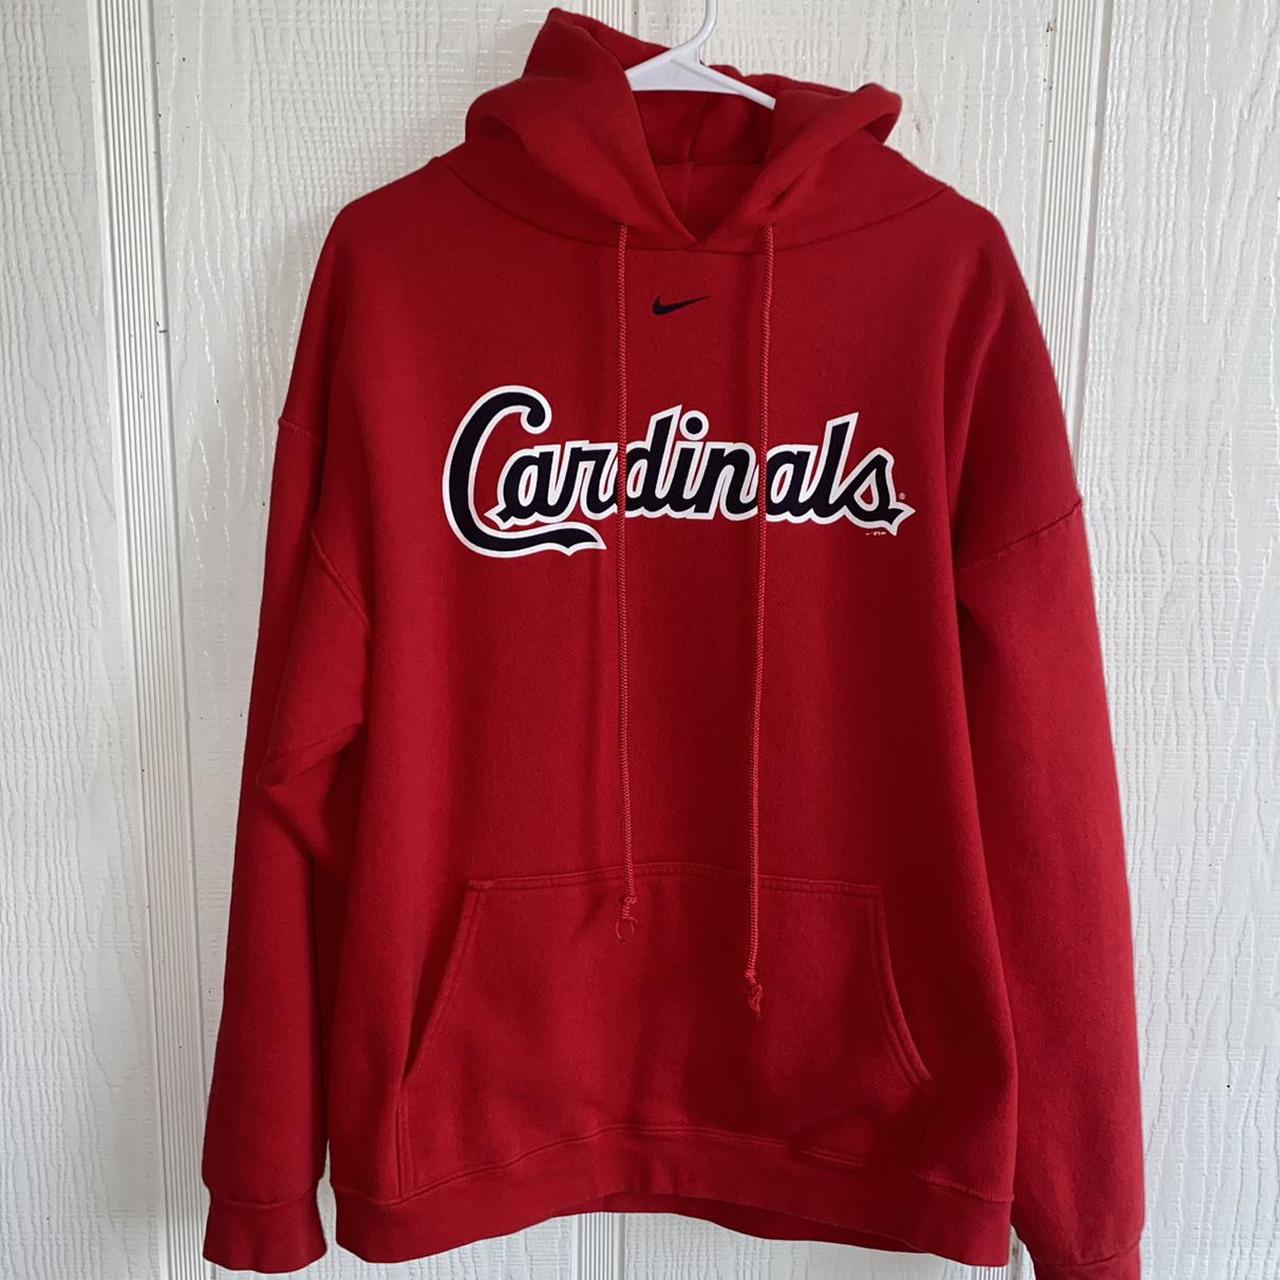 Product Image 1 - Nike st.Louis cardinals hoodie
FREE SHIPPING
Size